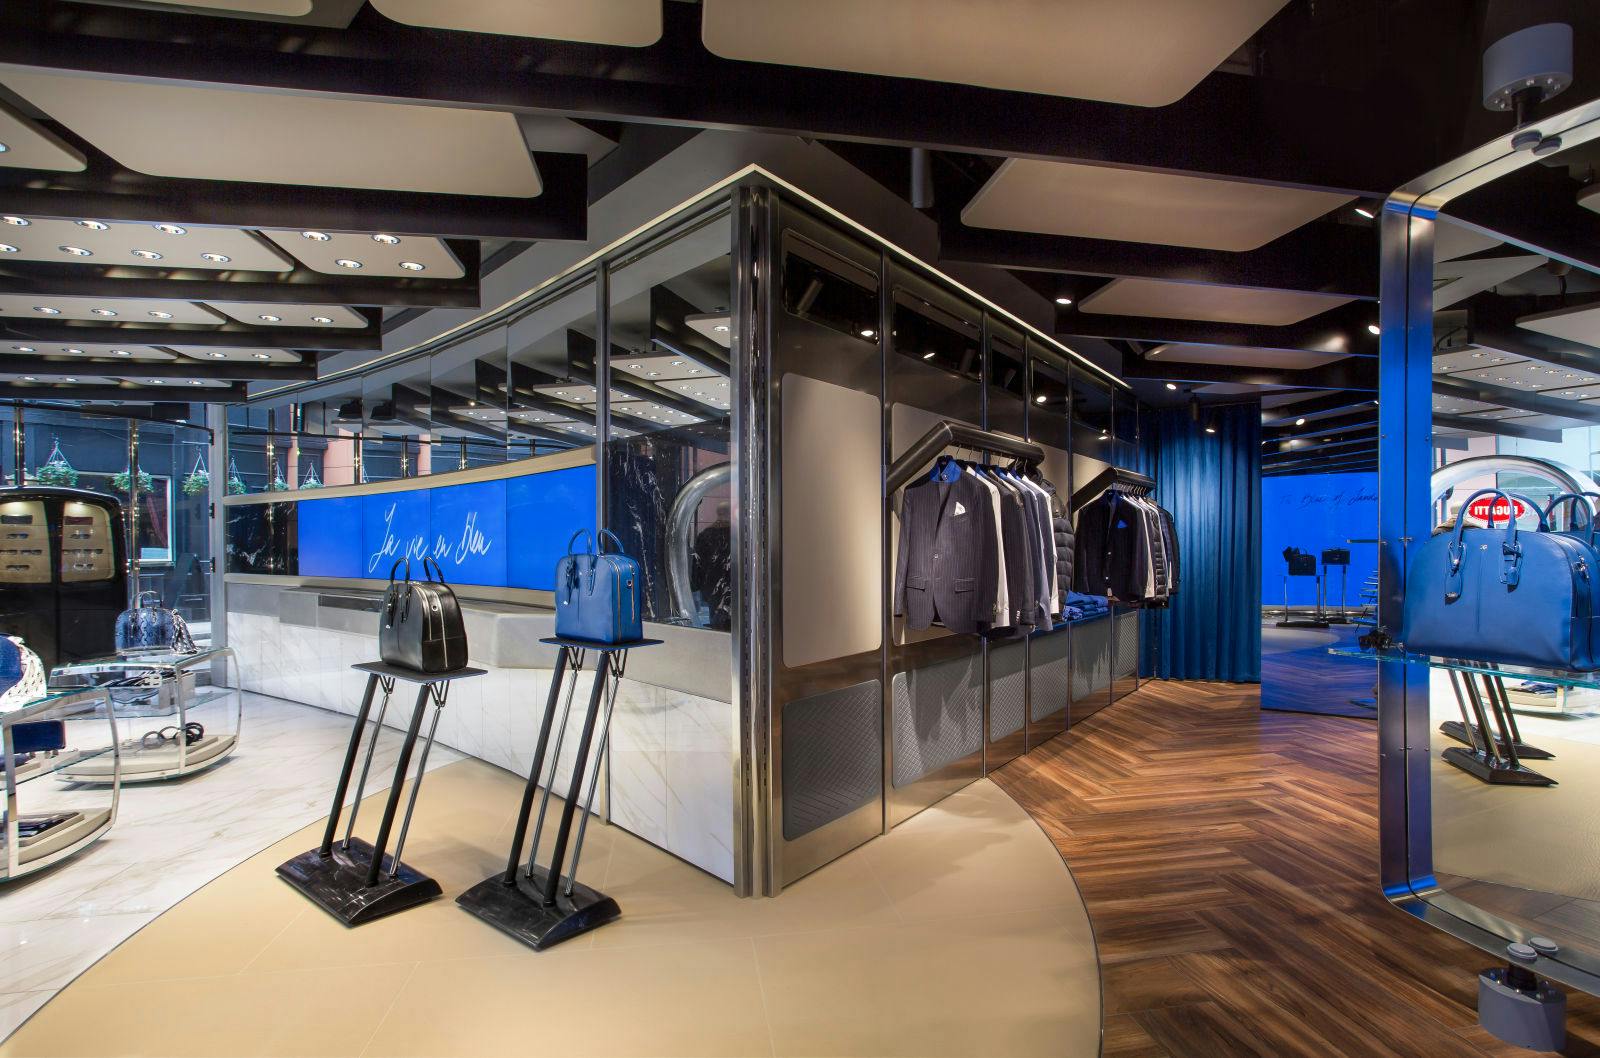 The interior of the boutique is divided into two areas. The EB – Ettore Bugatti Collection is displayed in the luxury/lifestyle area, which is fitted with an elegant dark wooden floor and brown leather wall panelling, both of which exude warmth and elegance. The Bugatti – Performance Luxury Collection is presented in the sports/performance area, which is in sharp contrast with the first area as it features distinctive white marble flooring and light grey leather wall panelling.